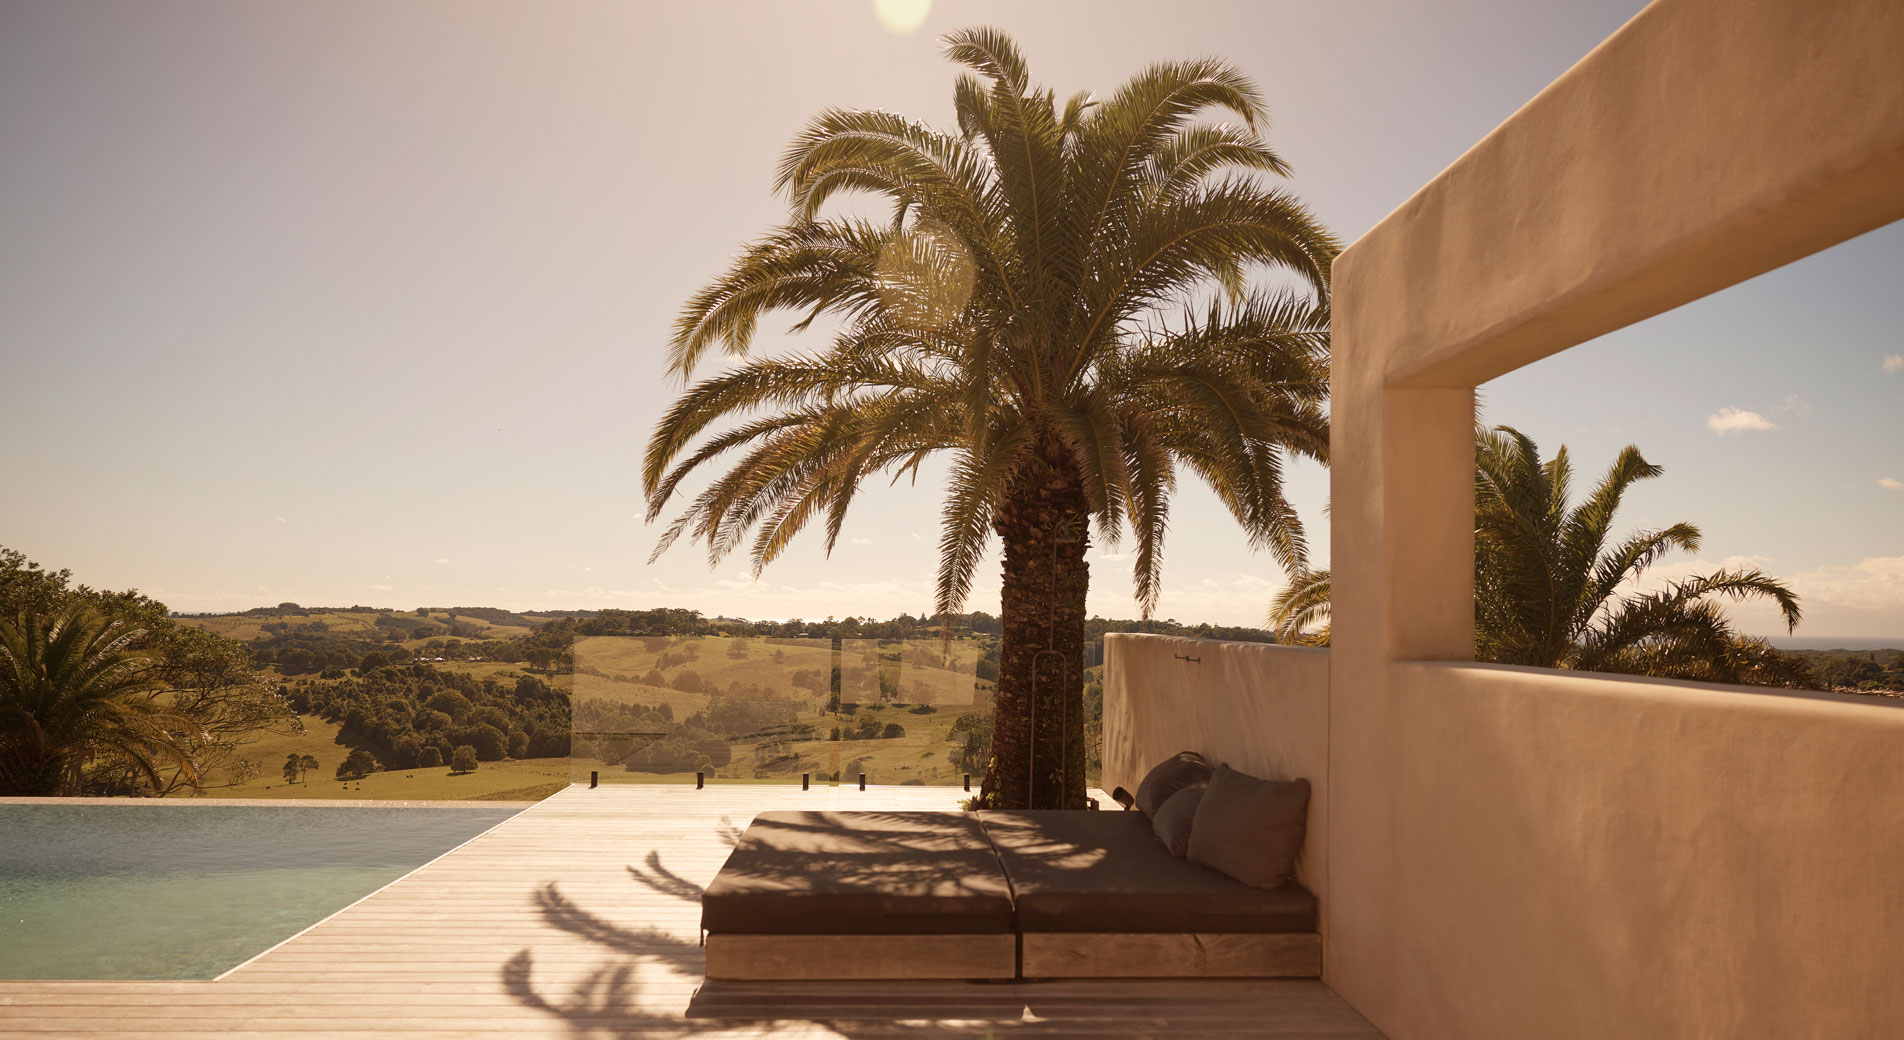 A balcony looking out to grassy hills. In the foreground is a pool and a daybed underneath a palm tree